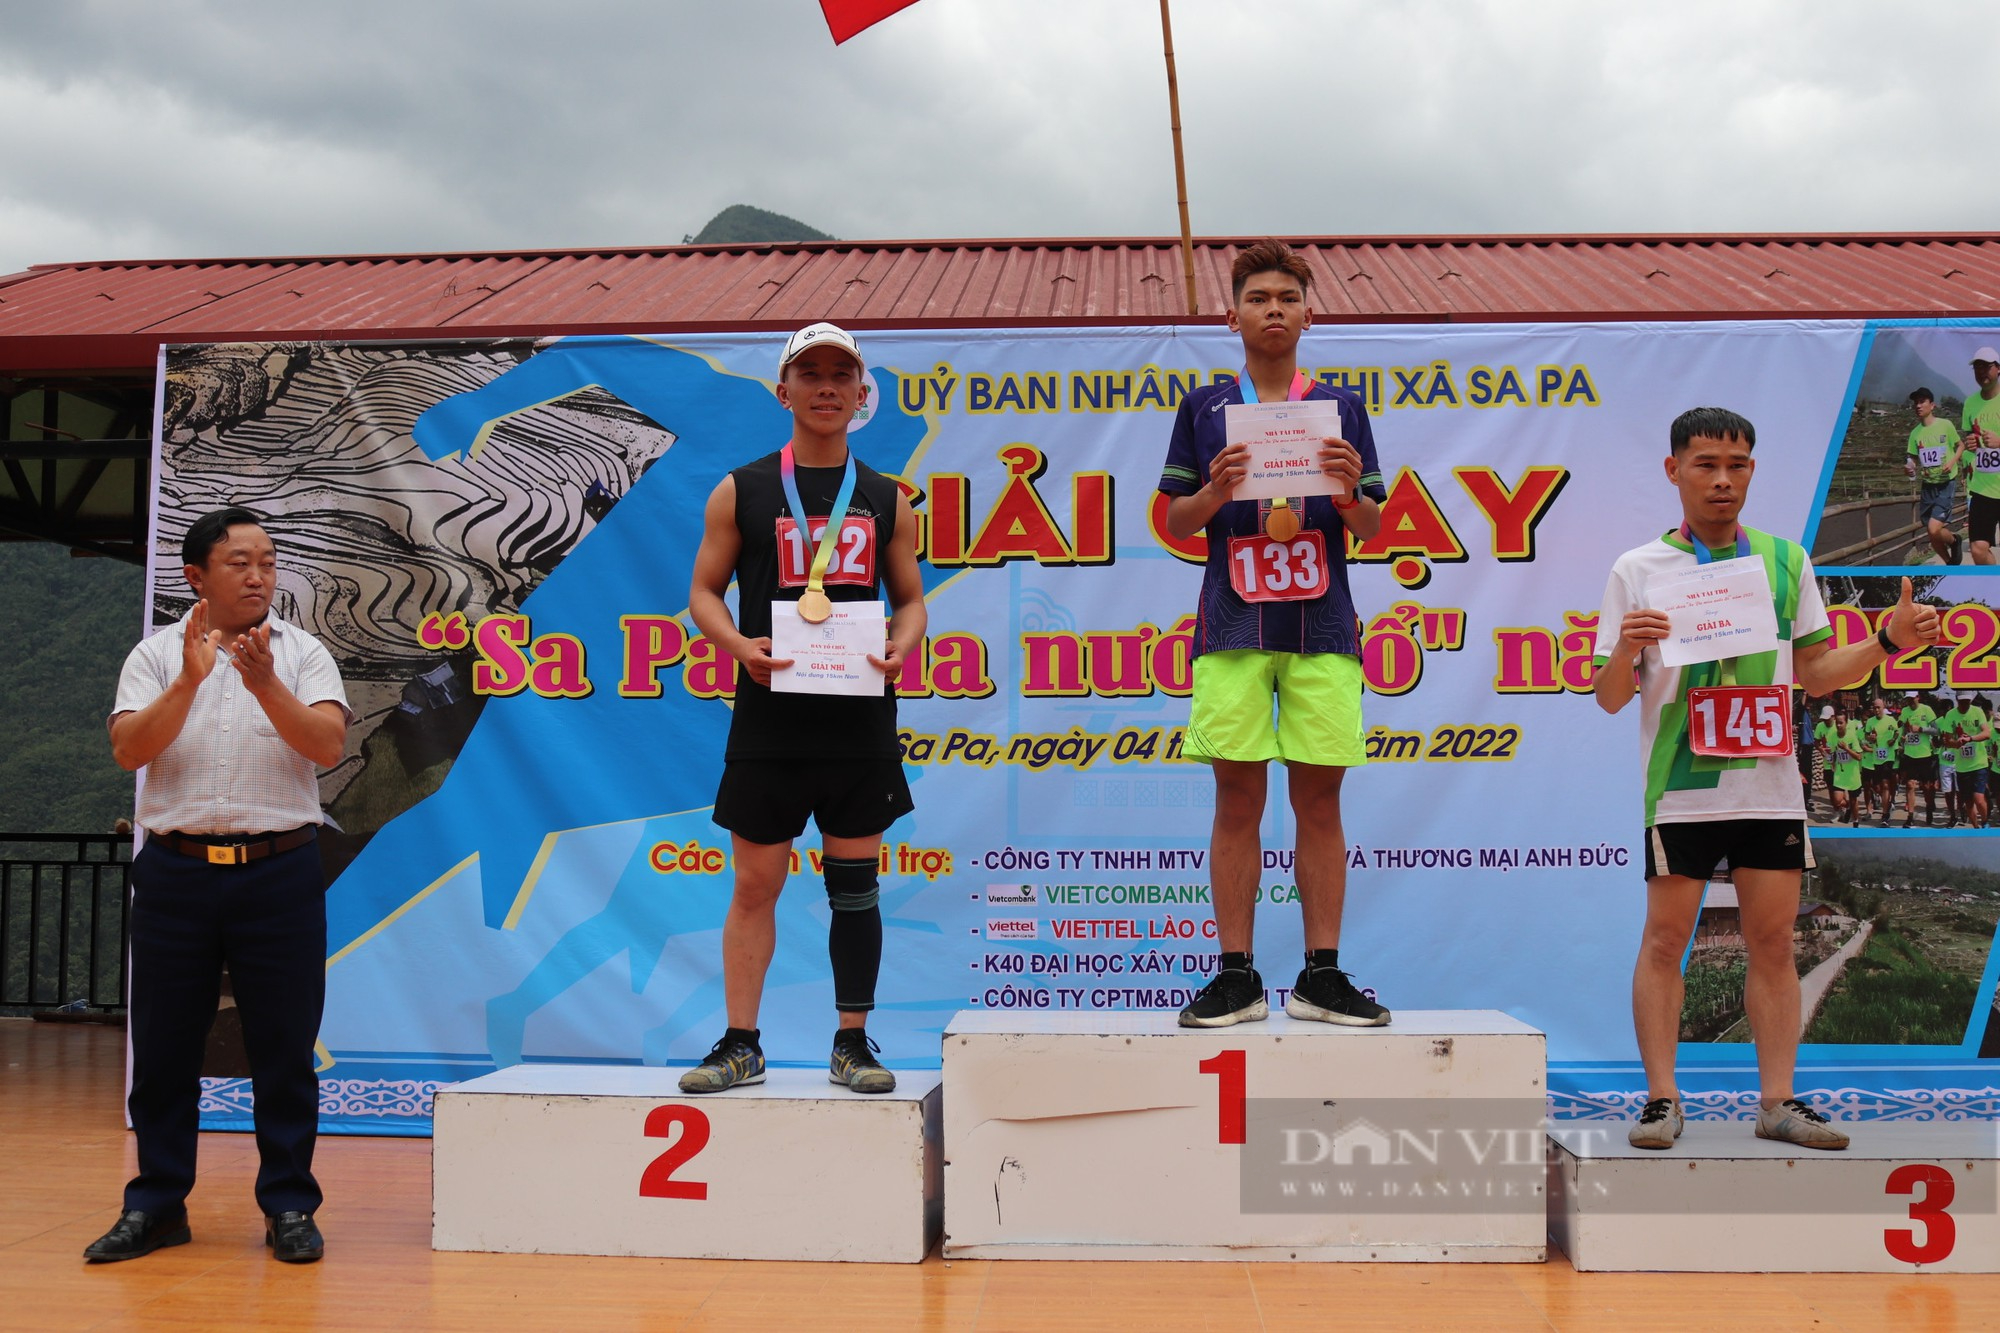 Hundreds of athletes participated in the running tournament 